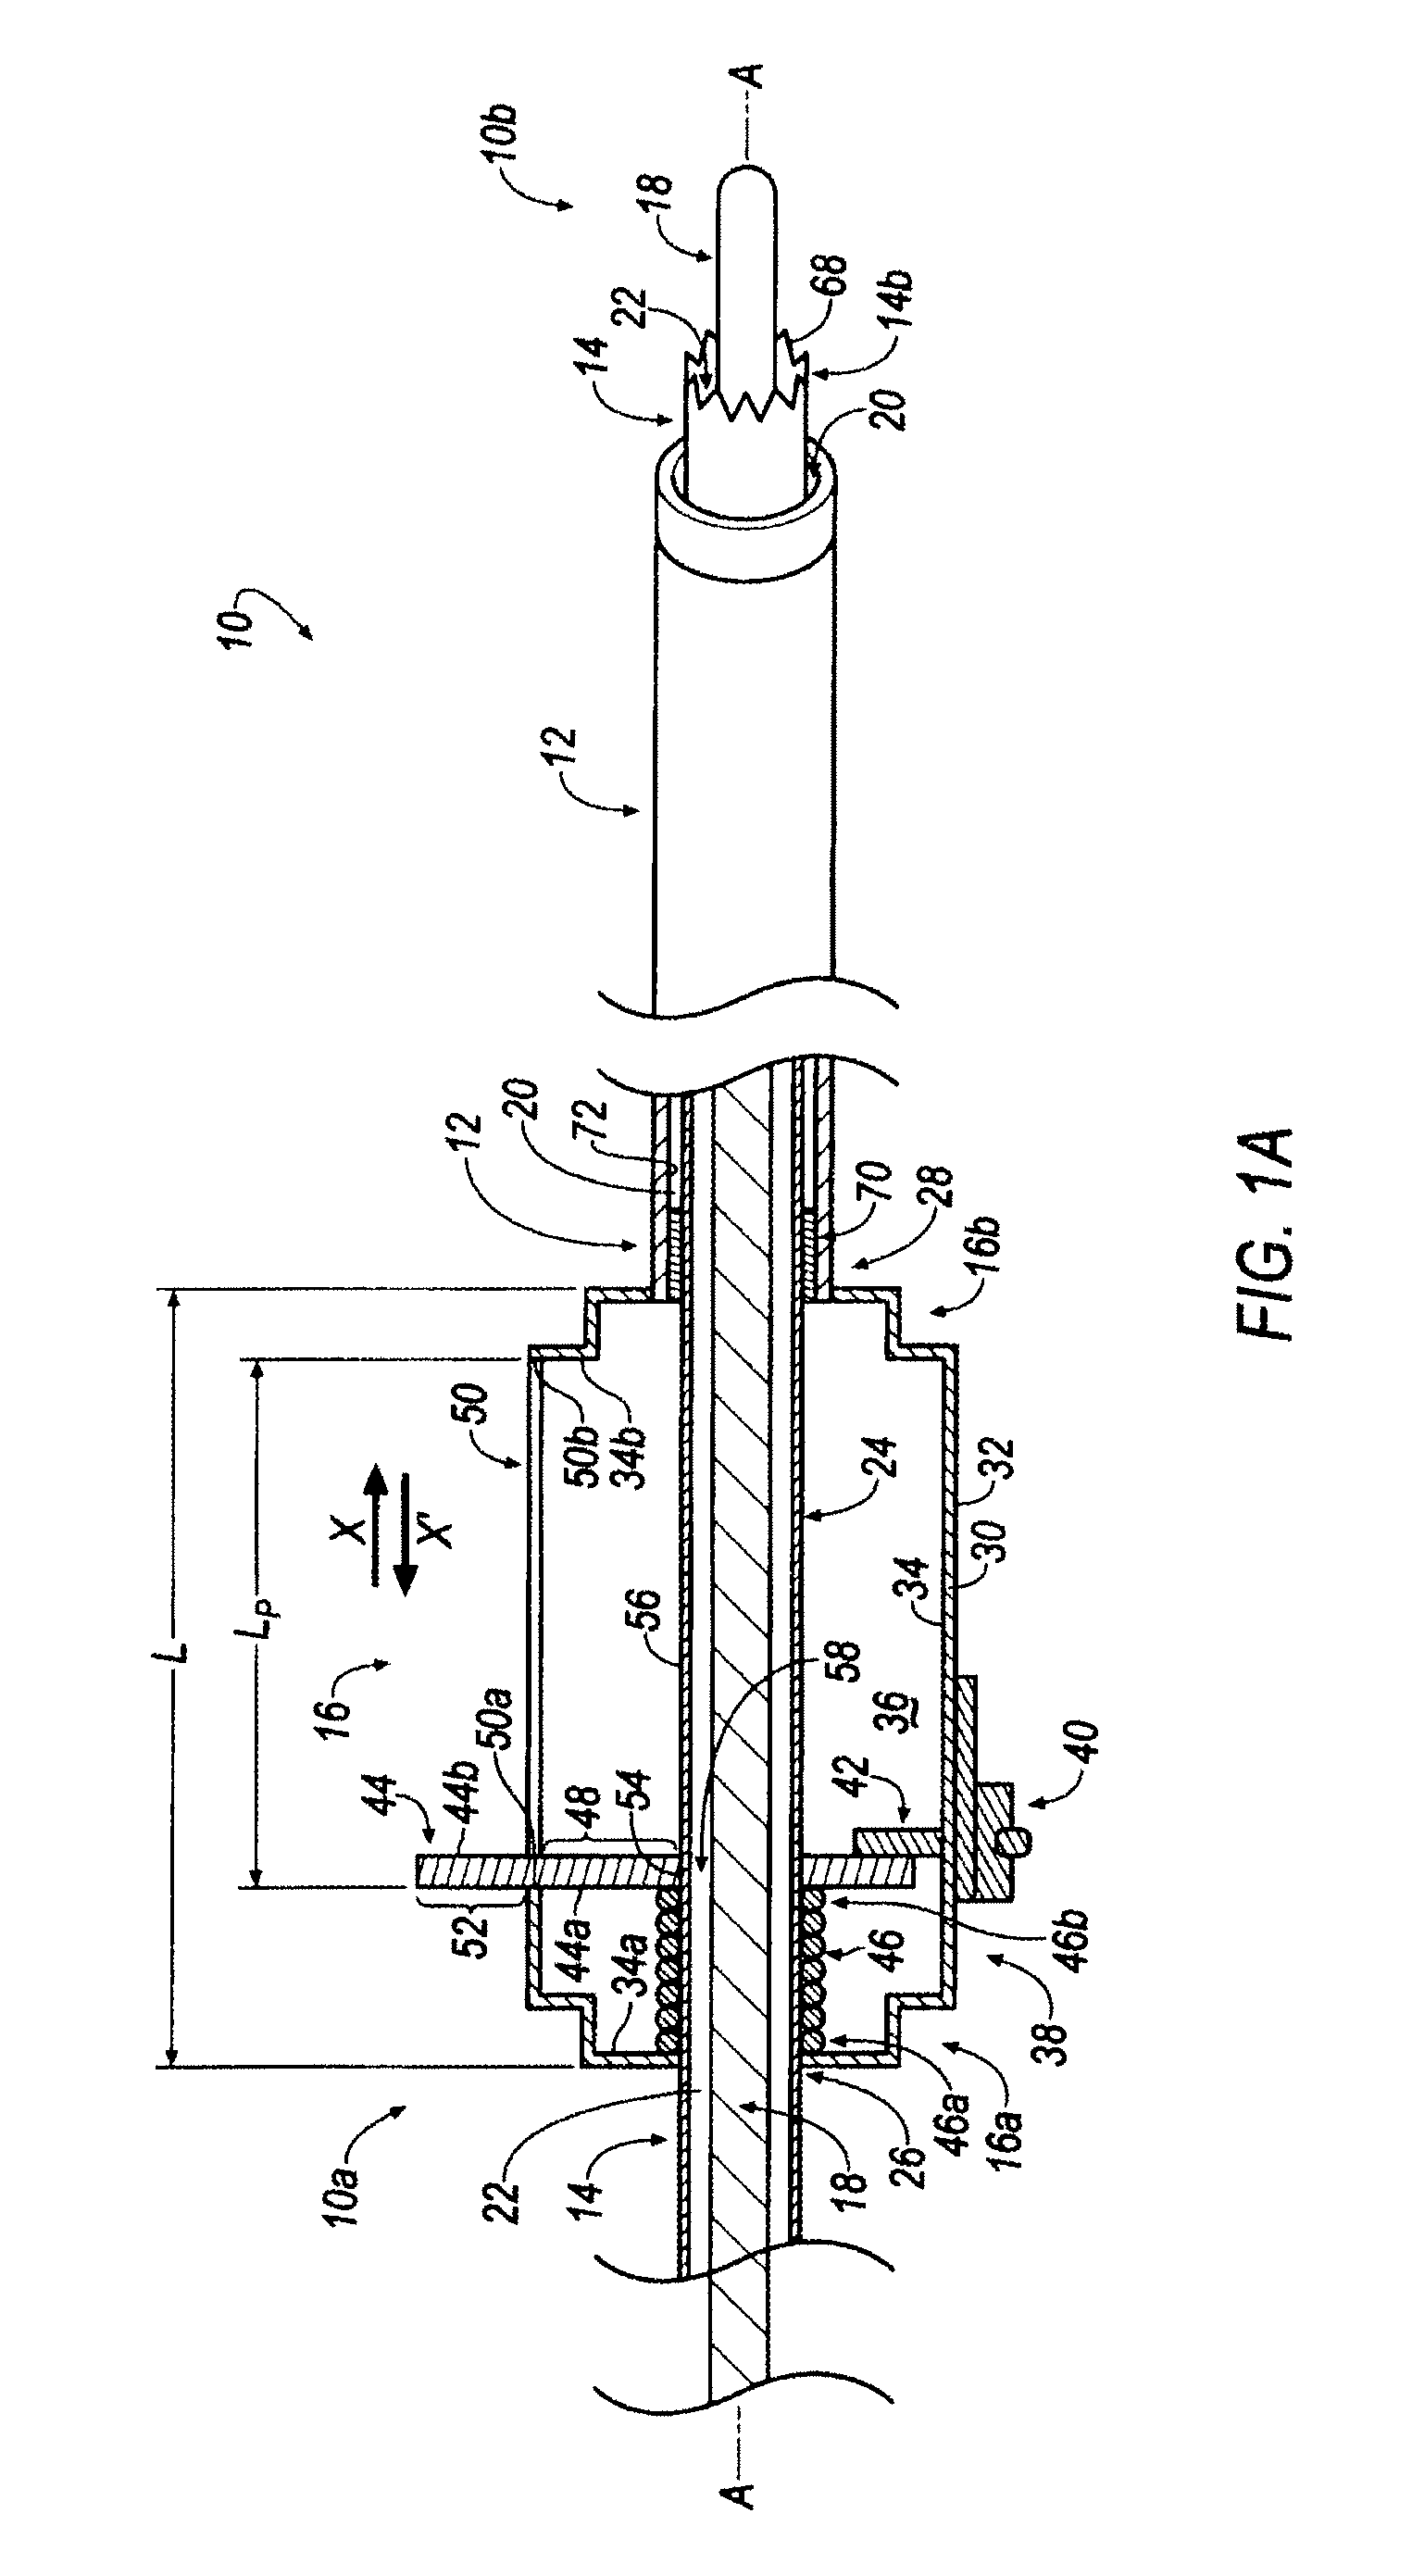 Revascularization Device for Treating an Occluded Arterial Vessel